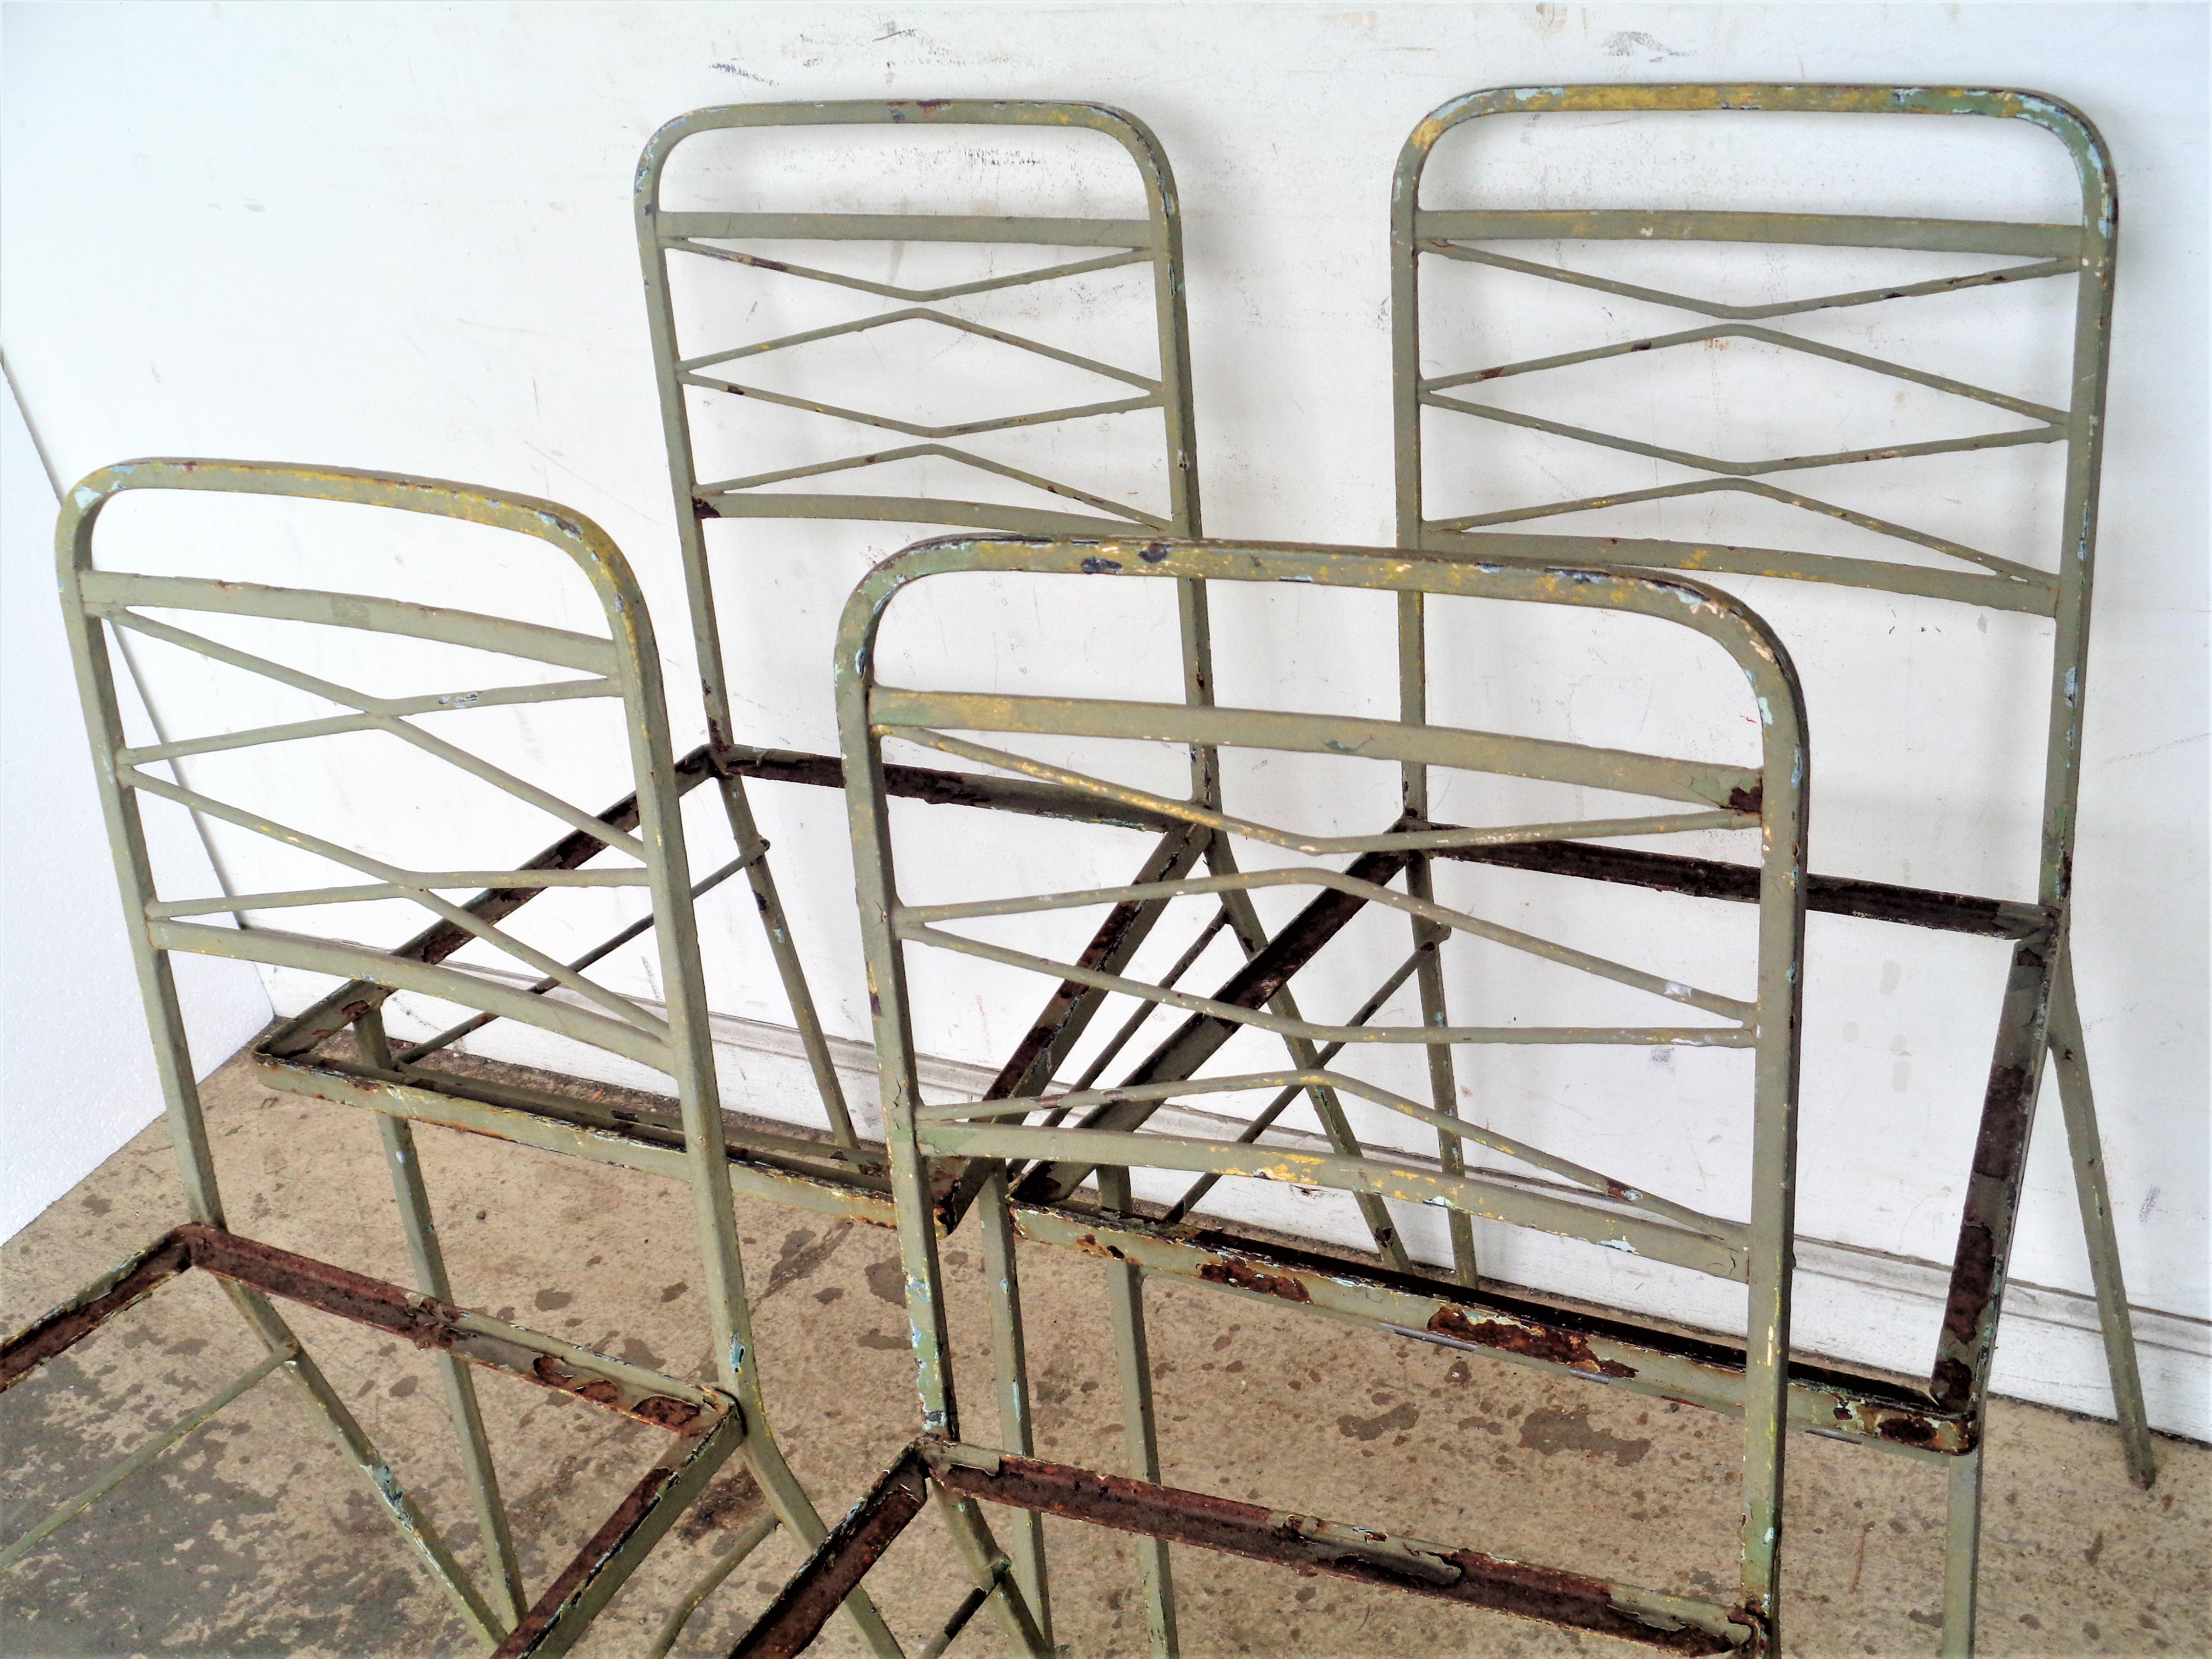   1940's Modernist Wrought Iron Chairs, Set of Four For Sale 7